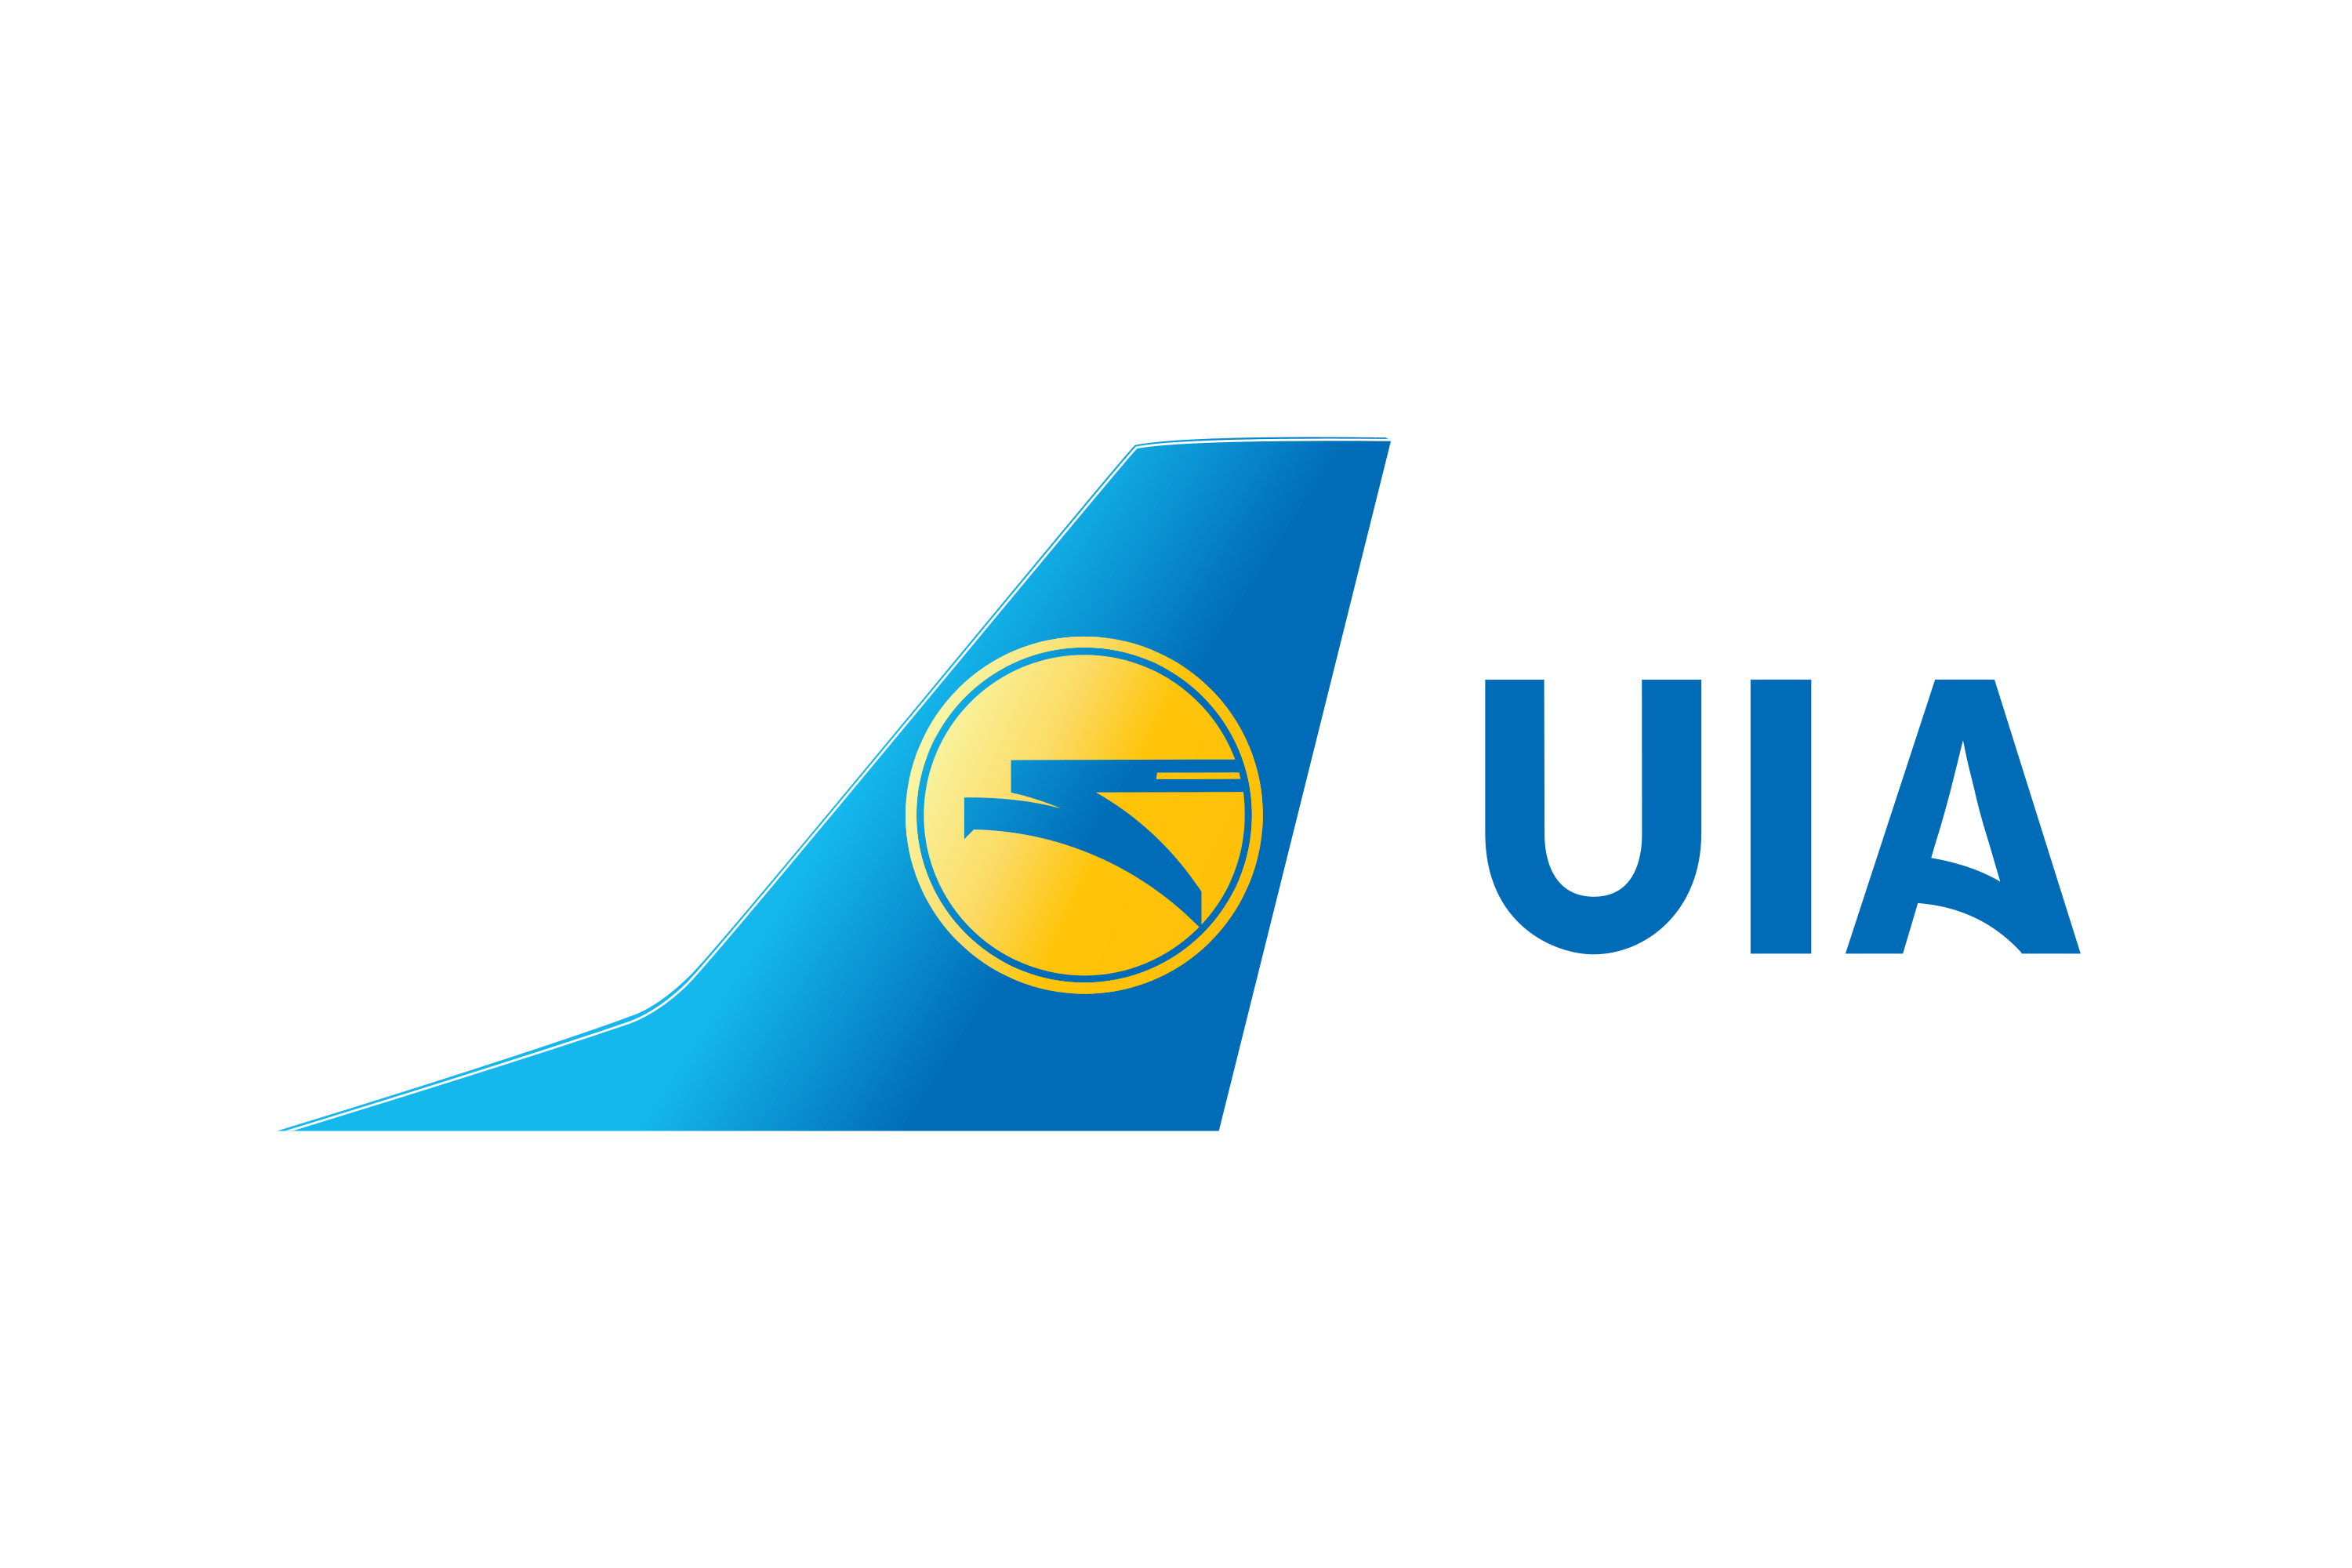 Ukraine International Airlines to arrive in Mexico